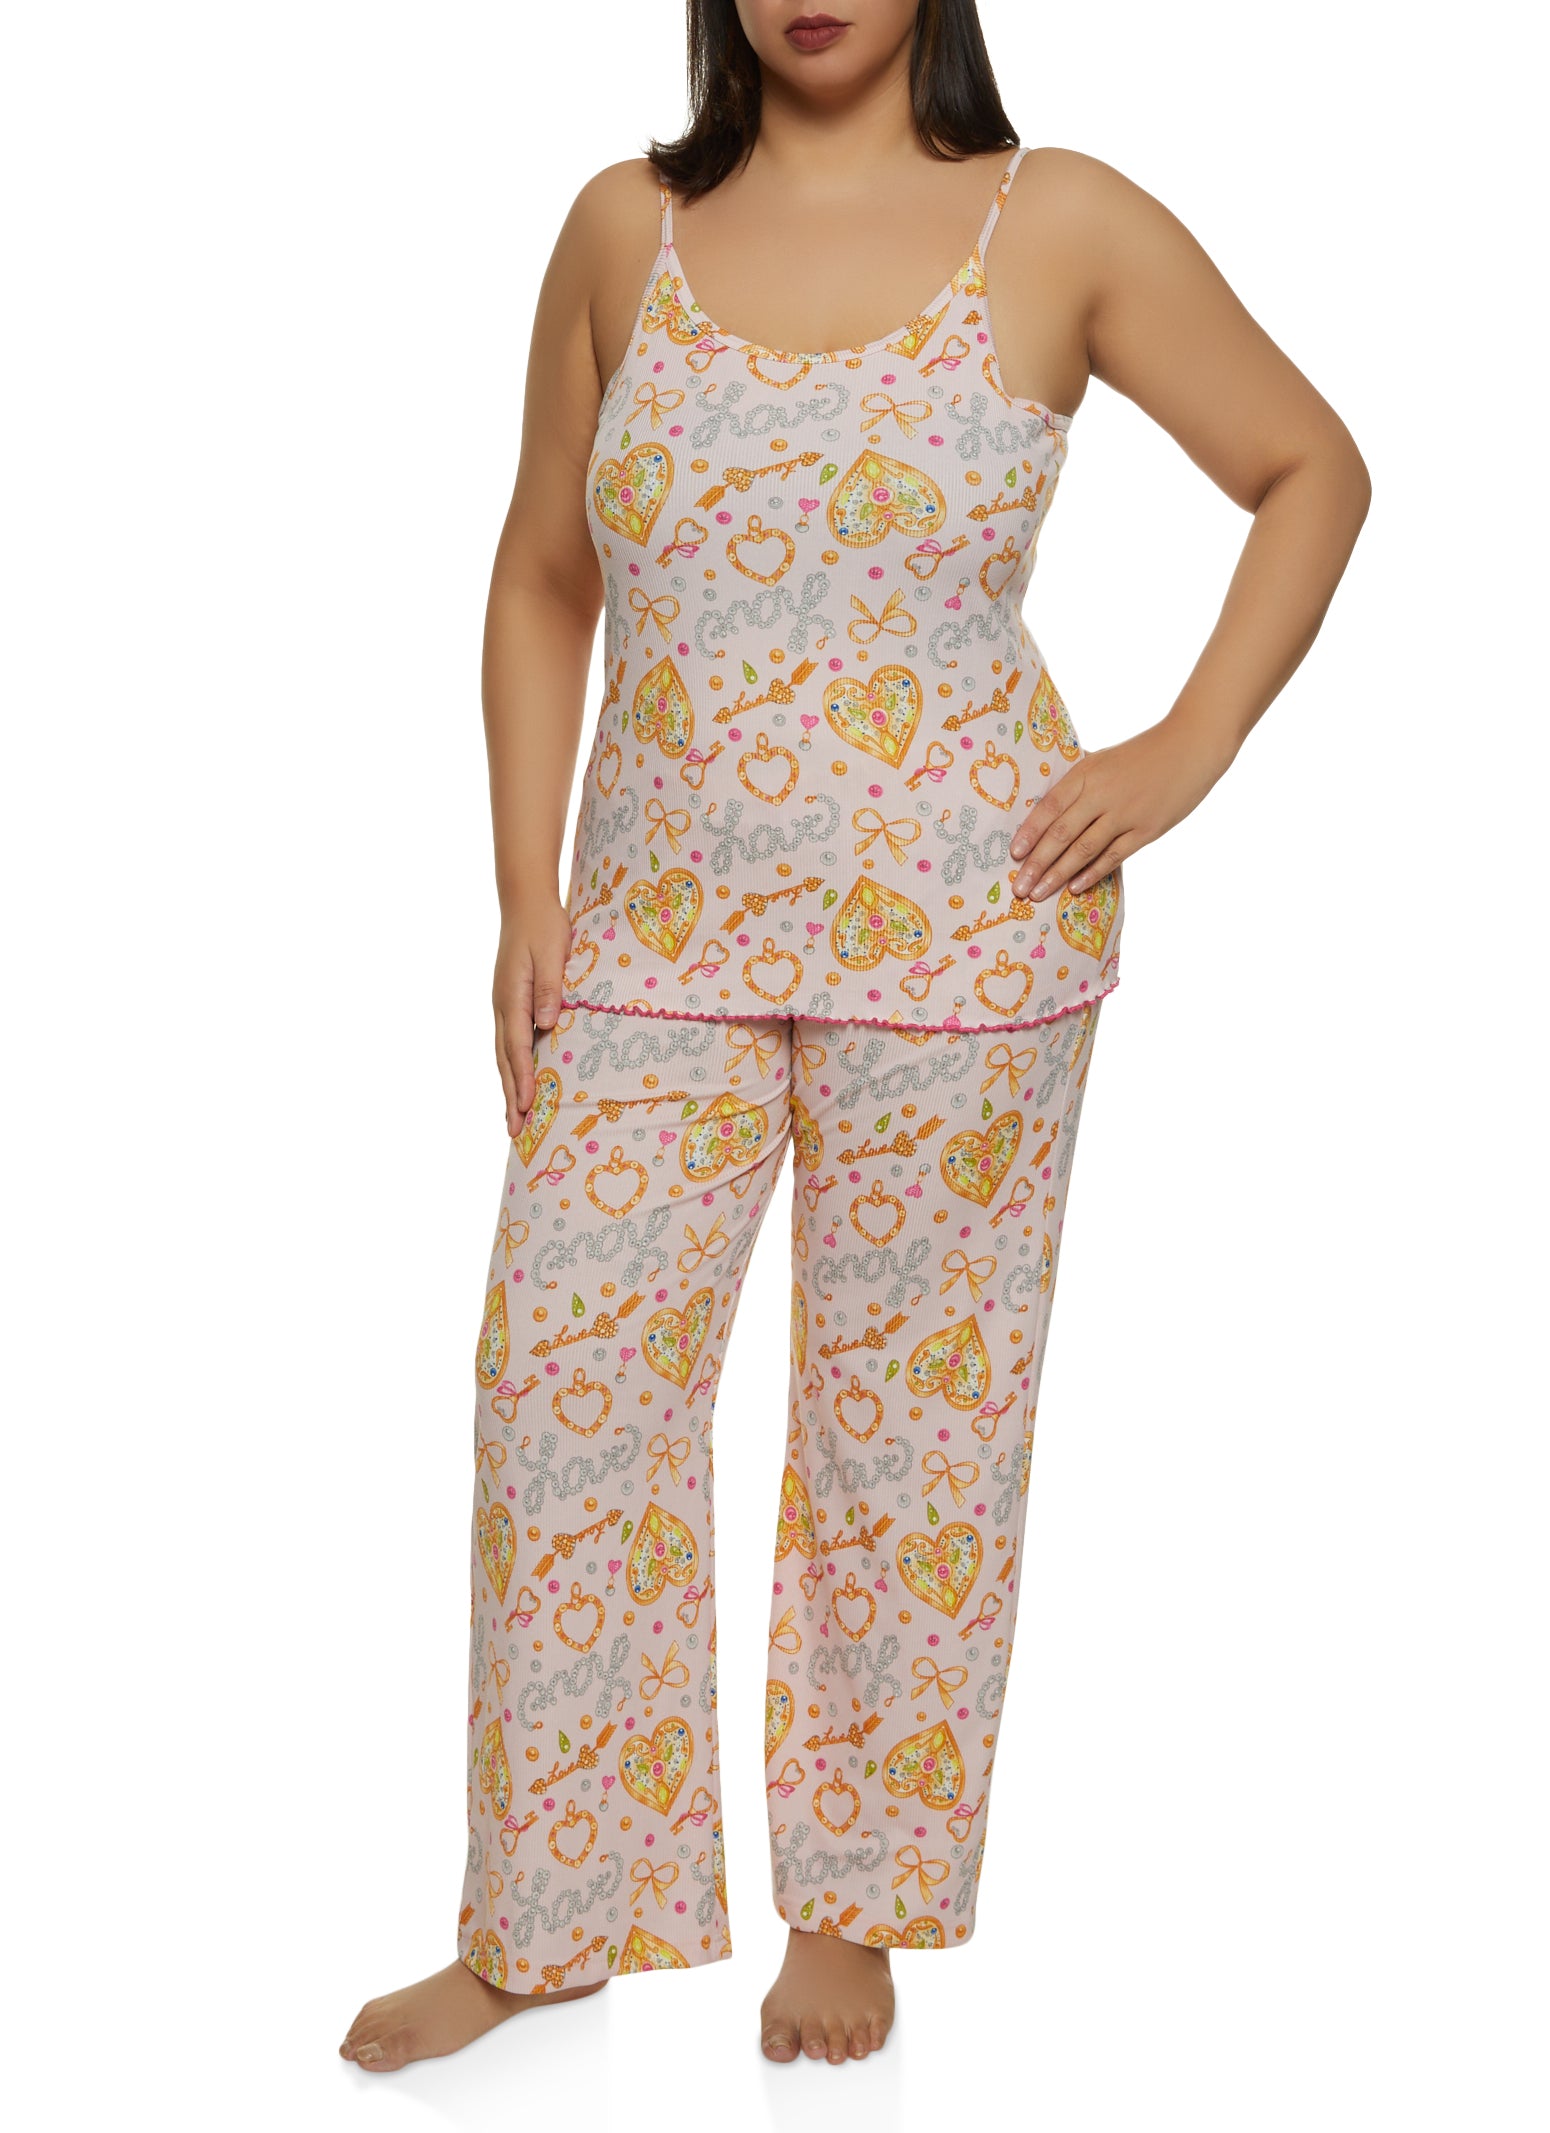 Womens Plus Size Graphic Print Pajama Cami and Pants, Multi, Size 2X